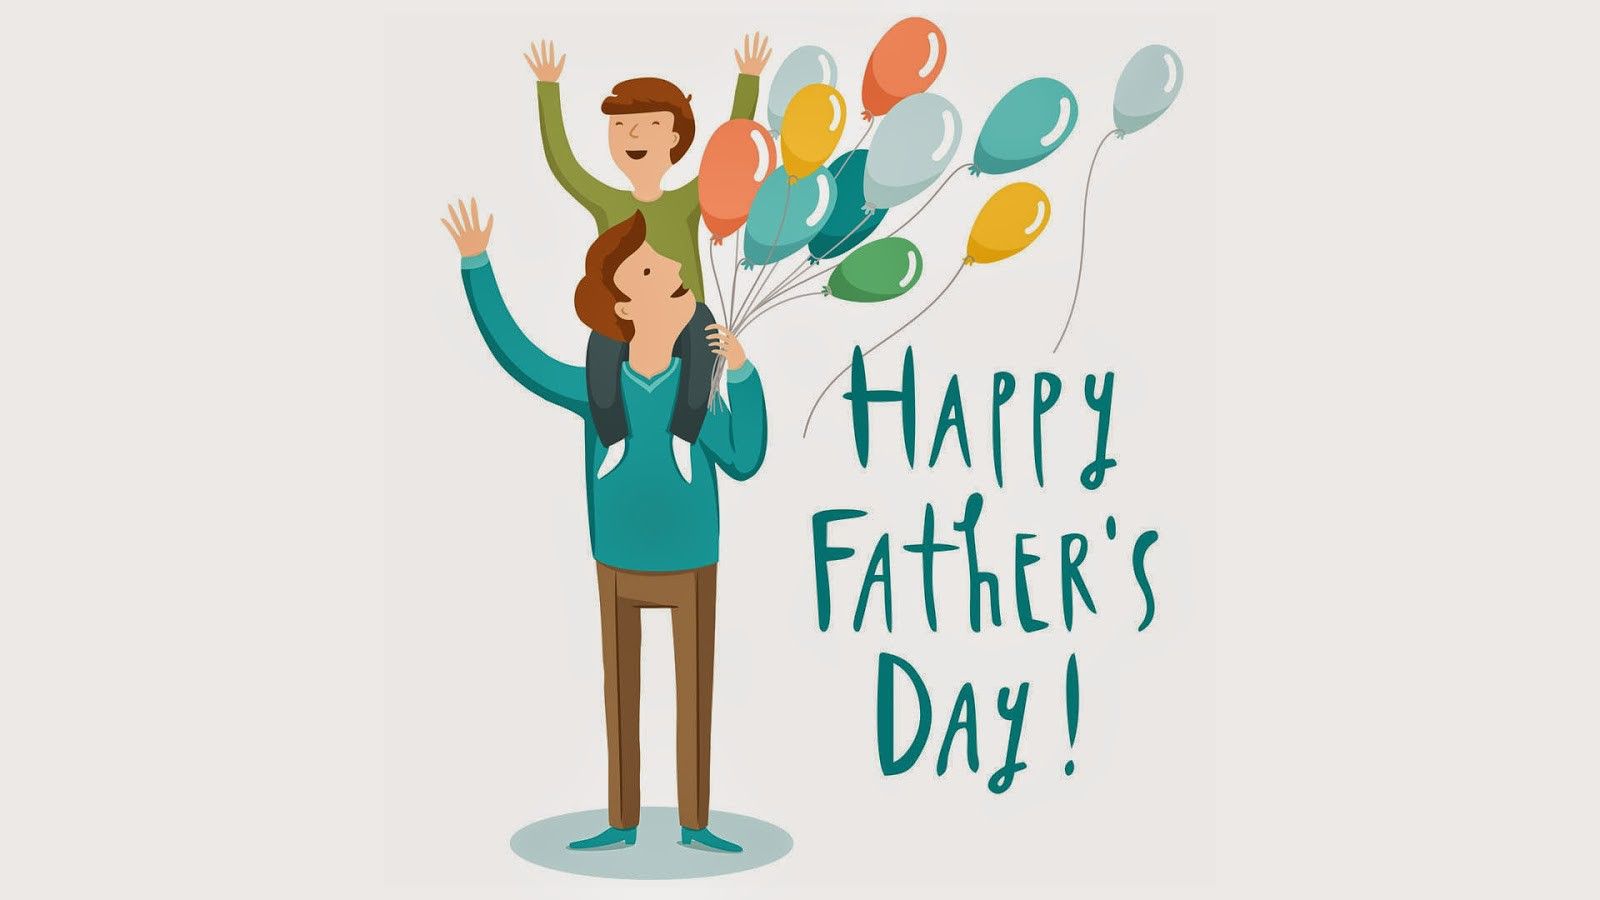 Happy Father's Day Wallpaper download free